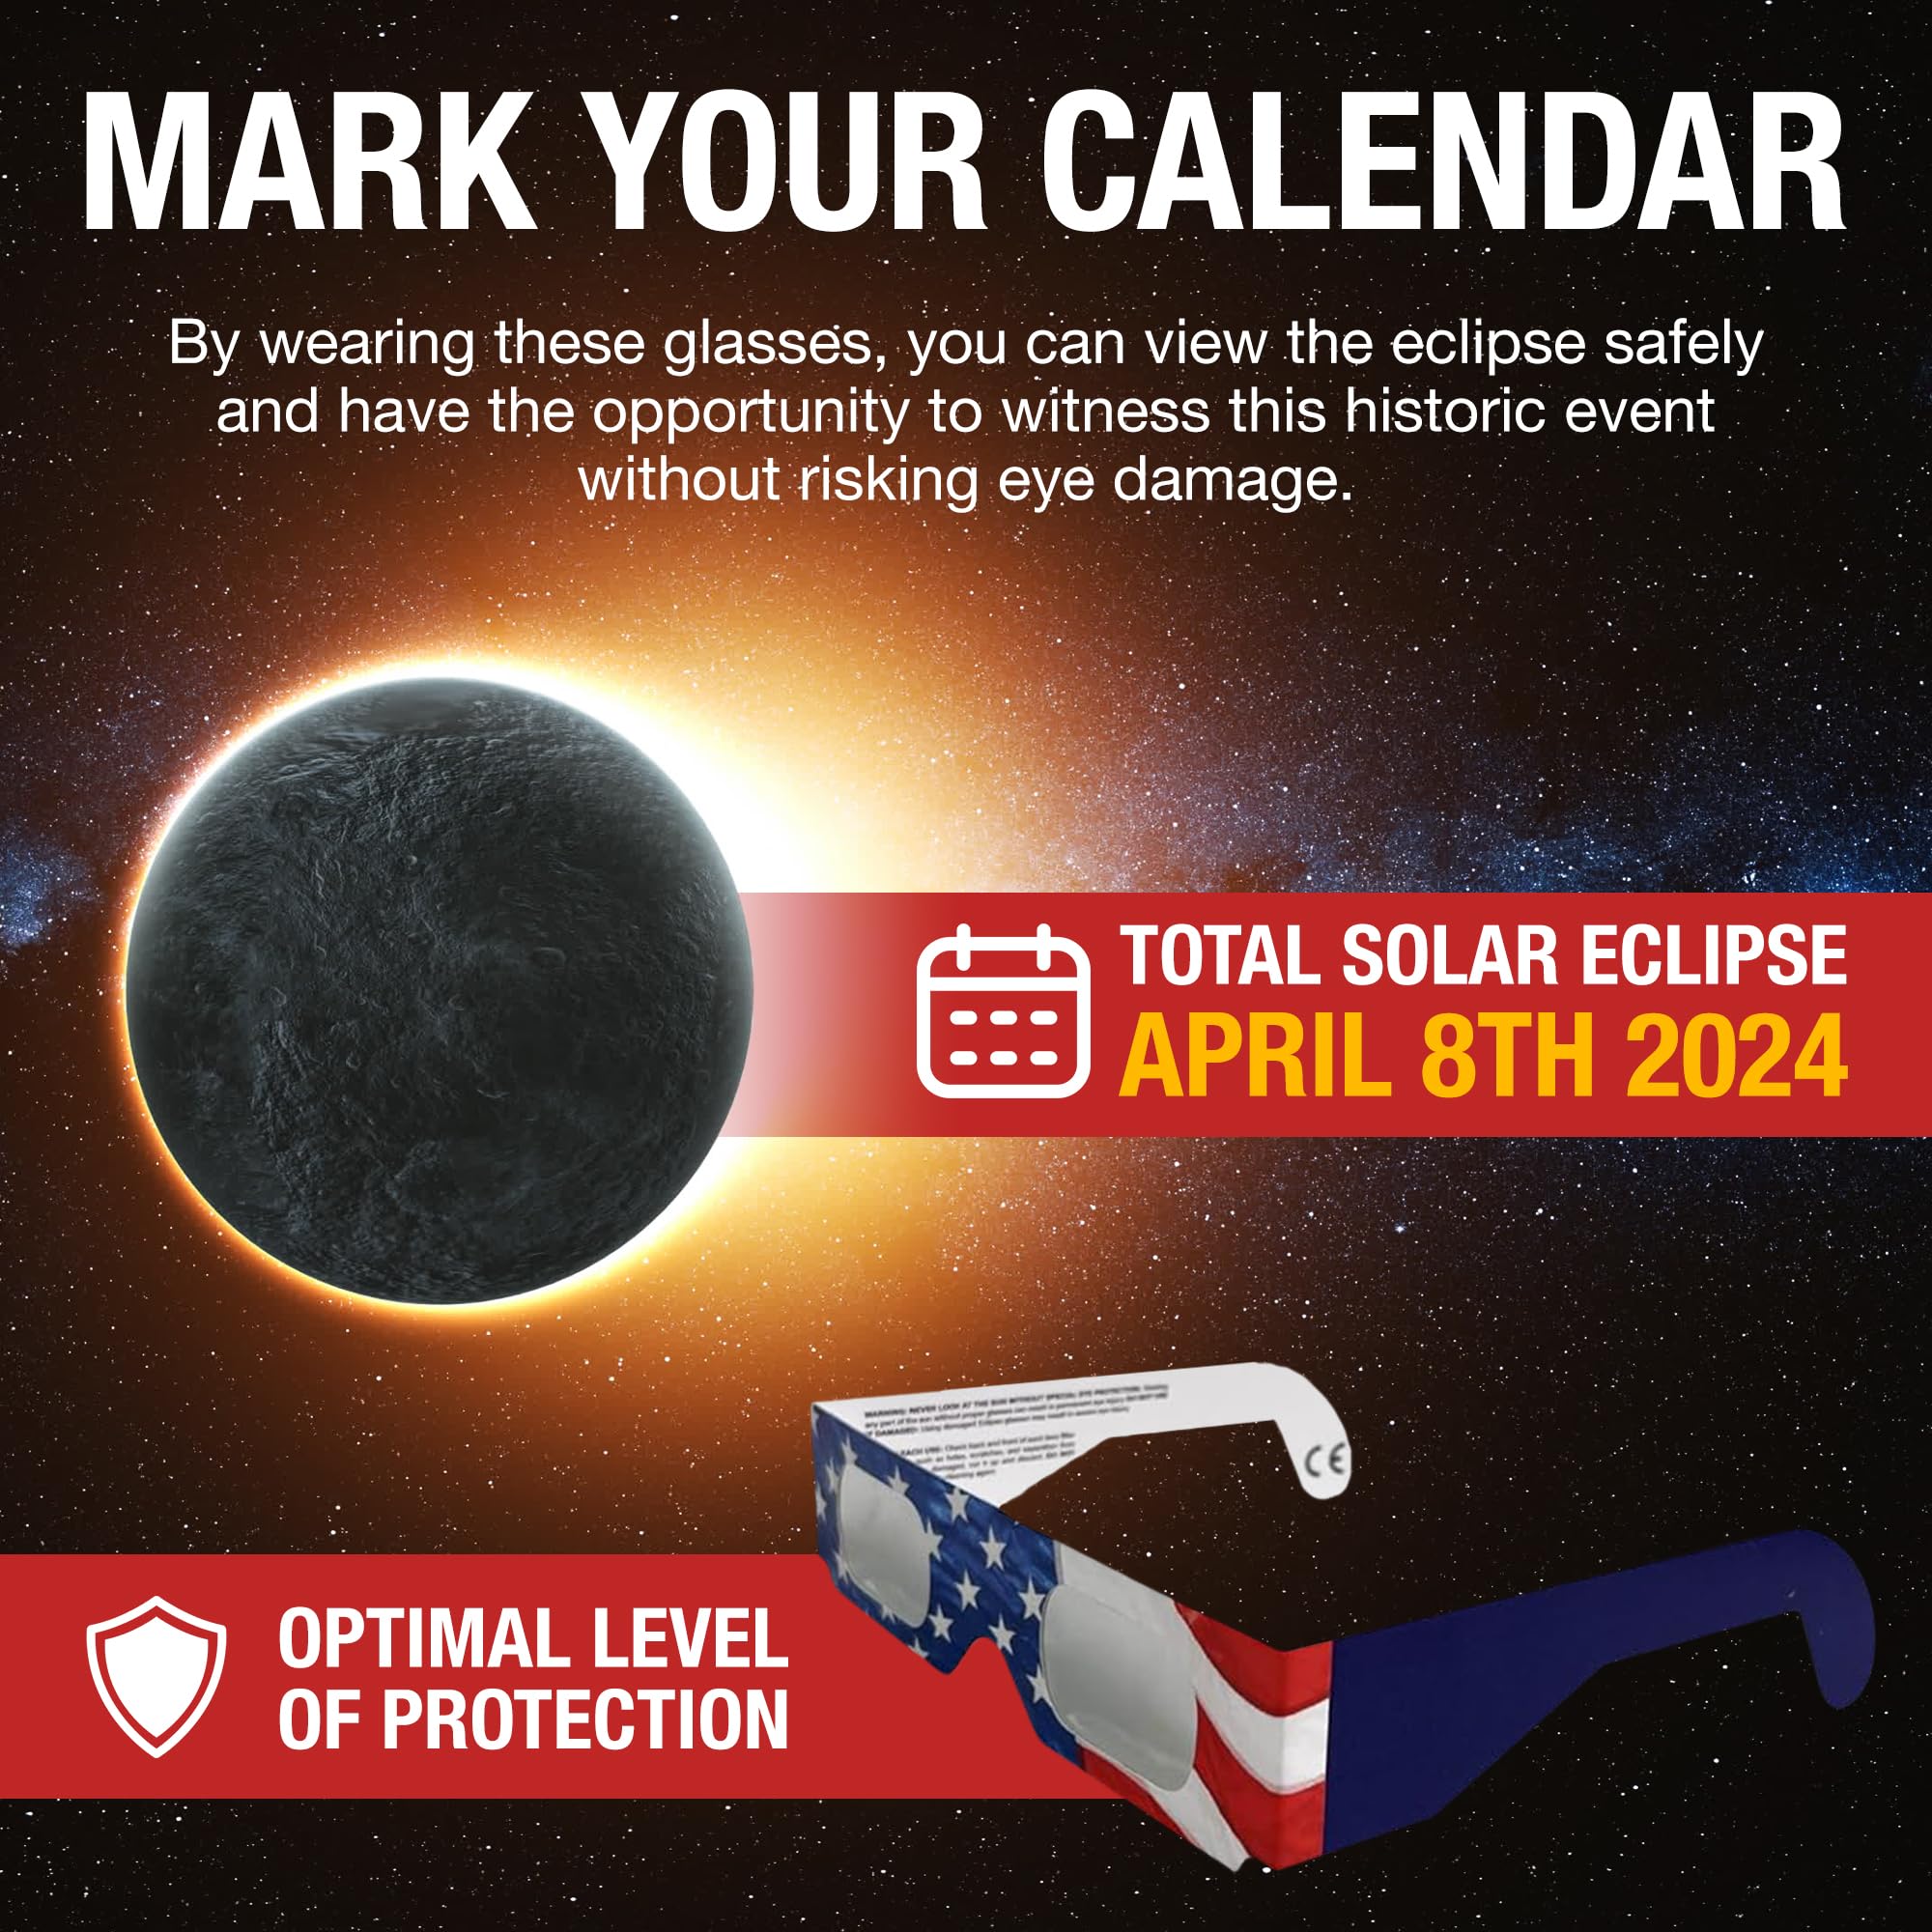 GottaHaveit Solar Eclipse Glasses 10 Pack | Safe for Direct Sun & Solar Eclipse Viewing, Lenses Made in USA for April 2024 Eclipse | NASA-Grade AAS Approved | ISO 12312-2, Safety & Welding Glasses